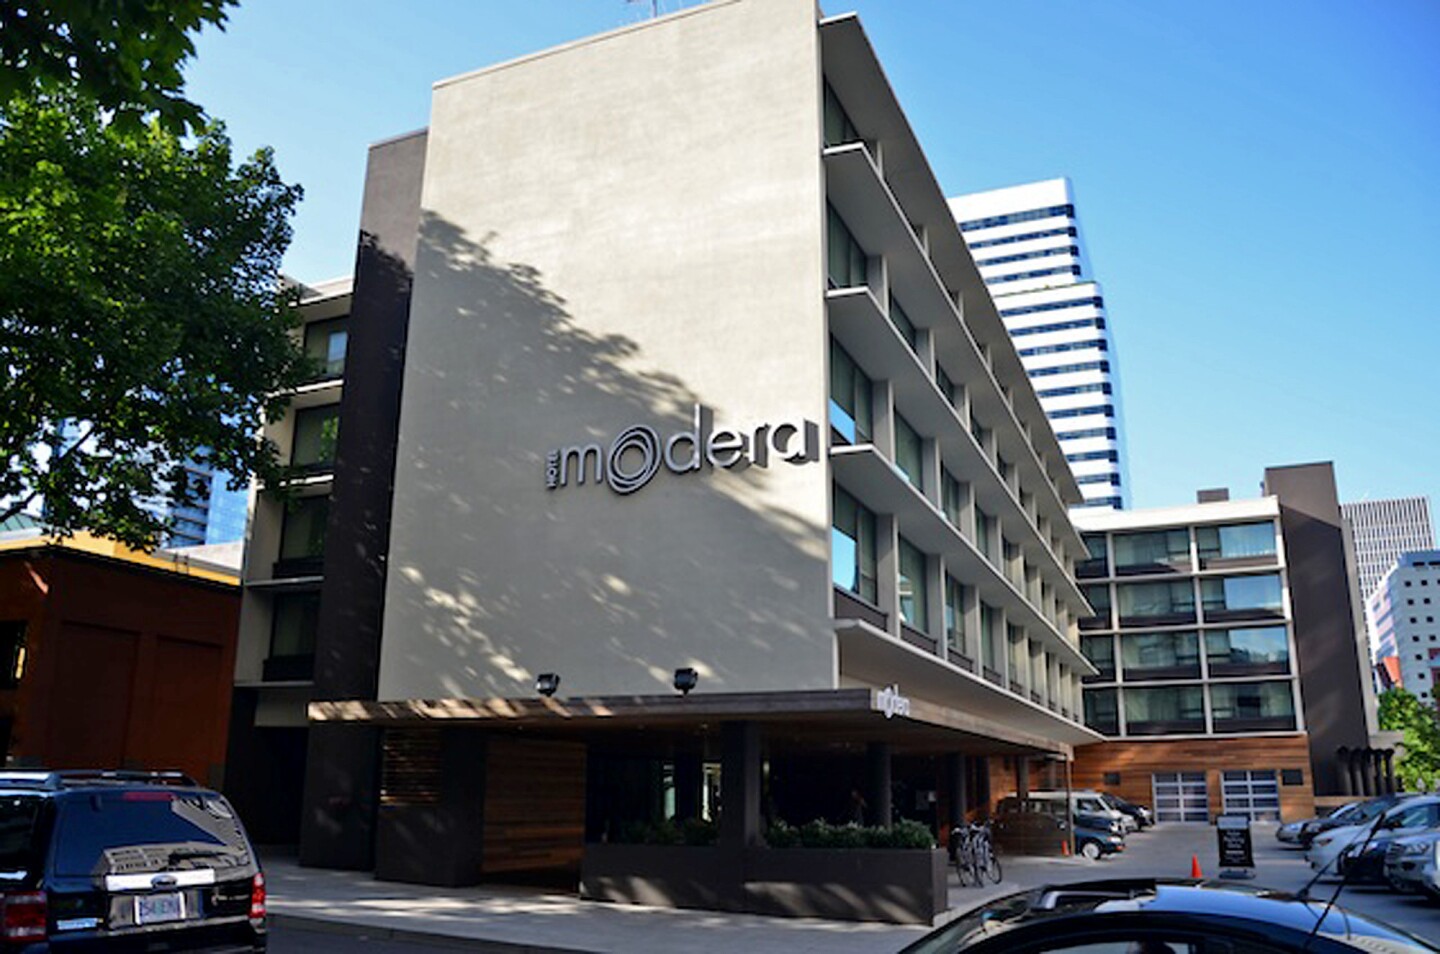 Hotel Modera is among the boutique hotels in Portland, Ore., located in the center of trendy downtown.